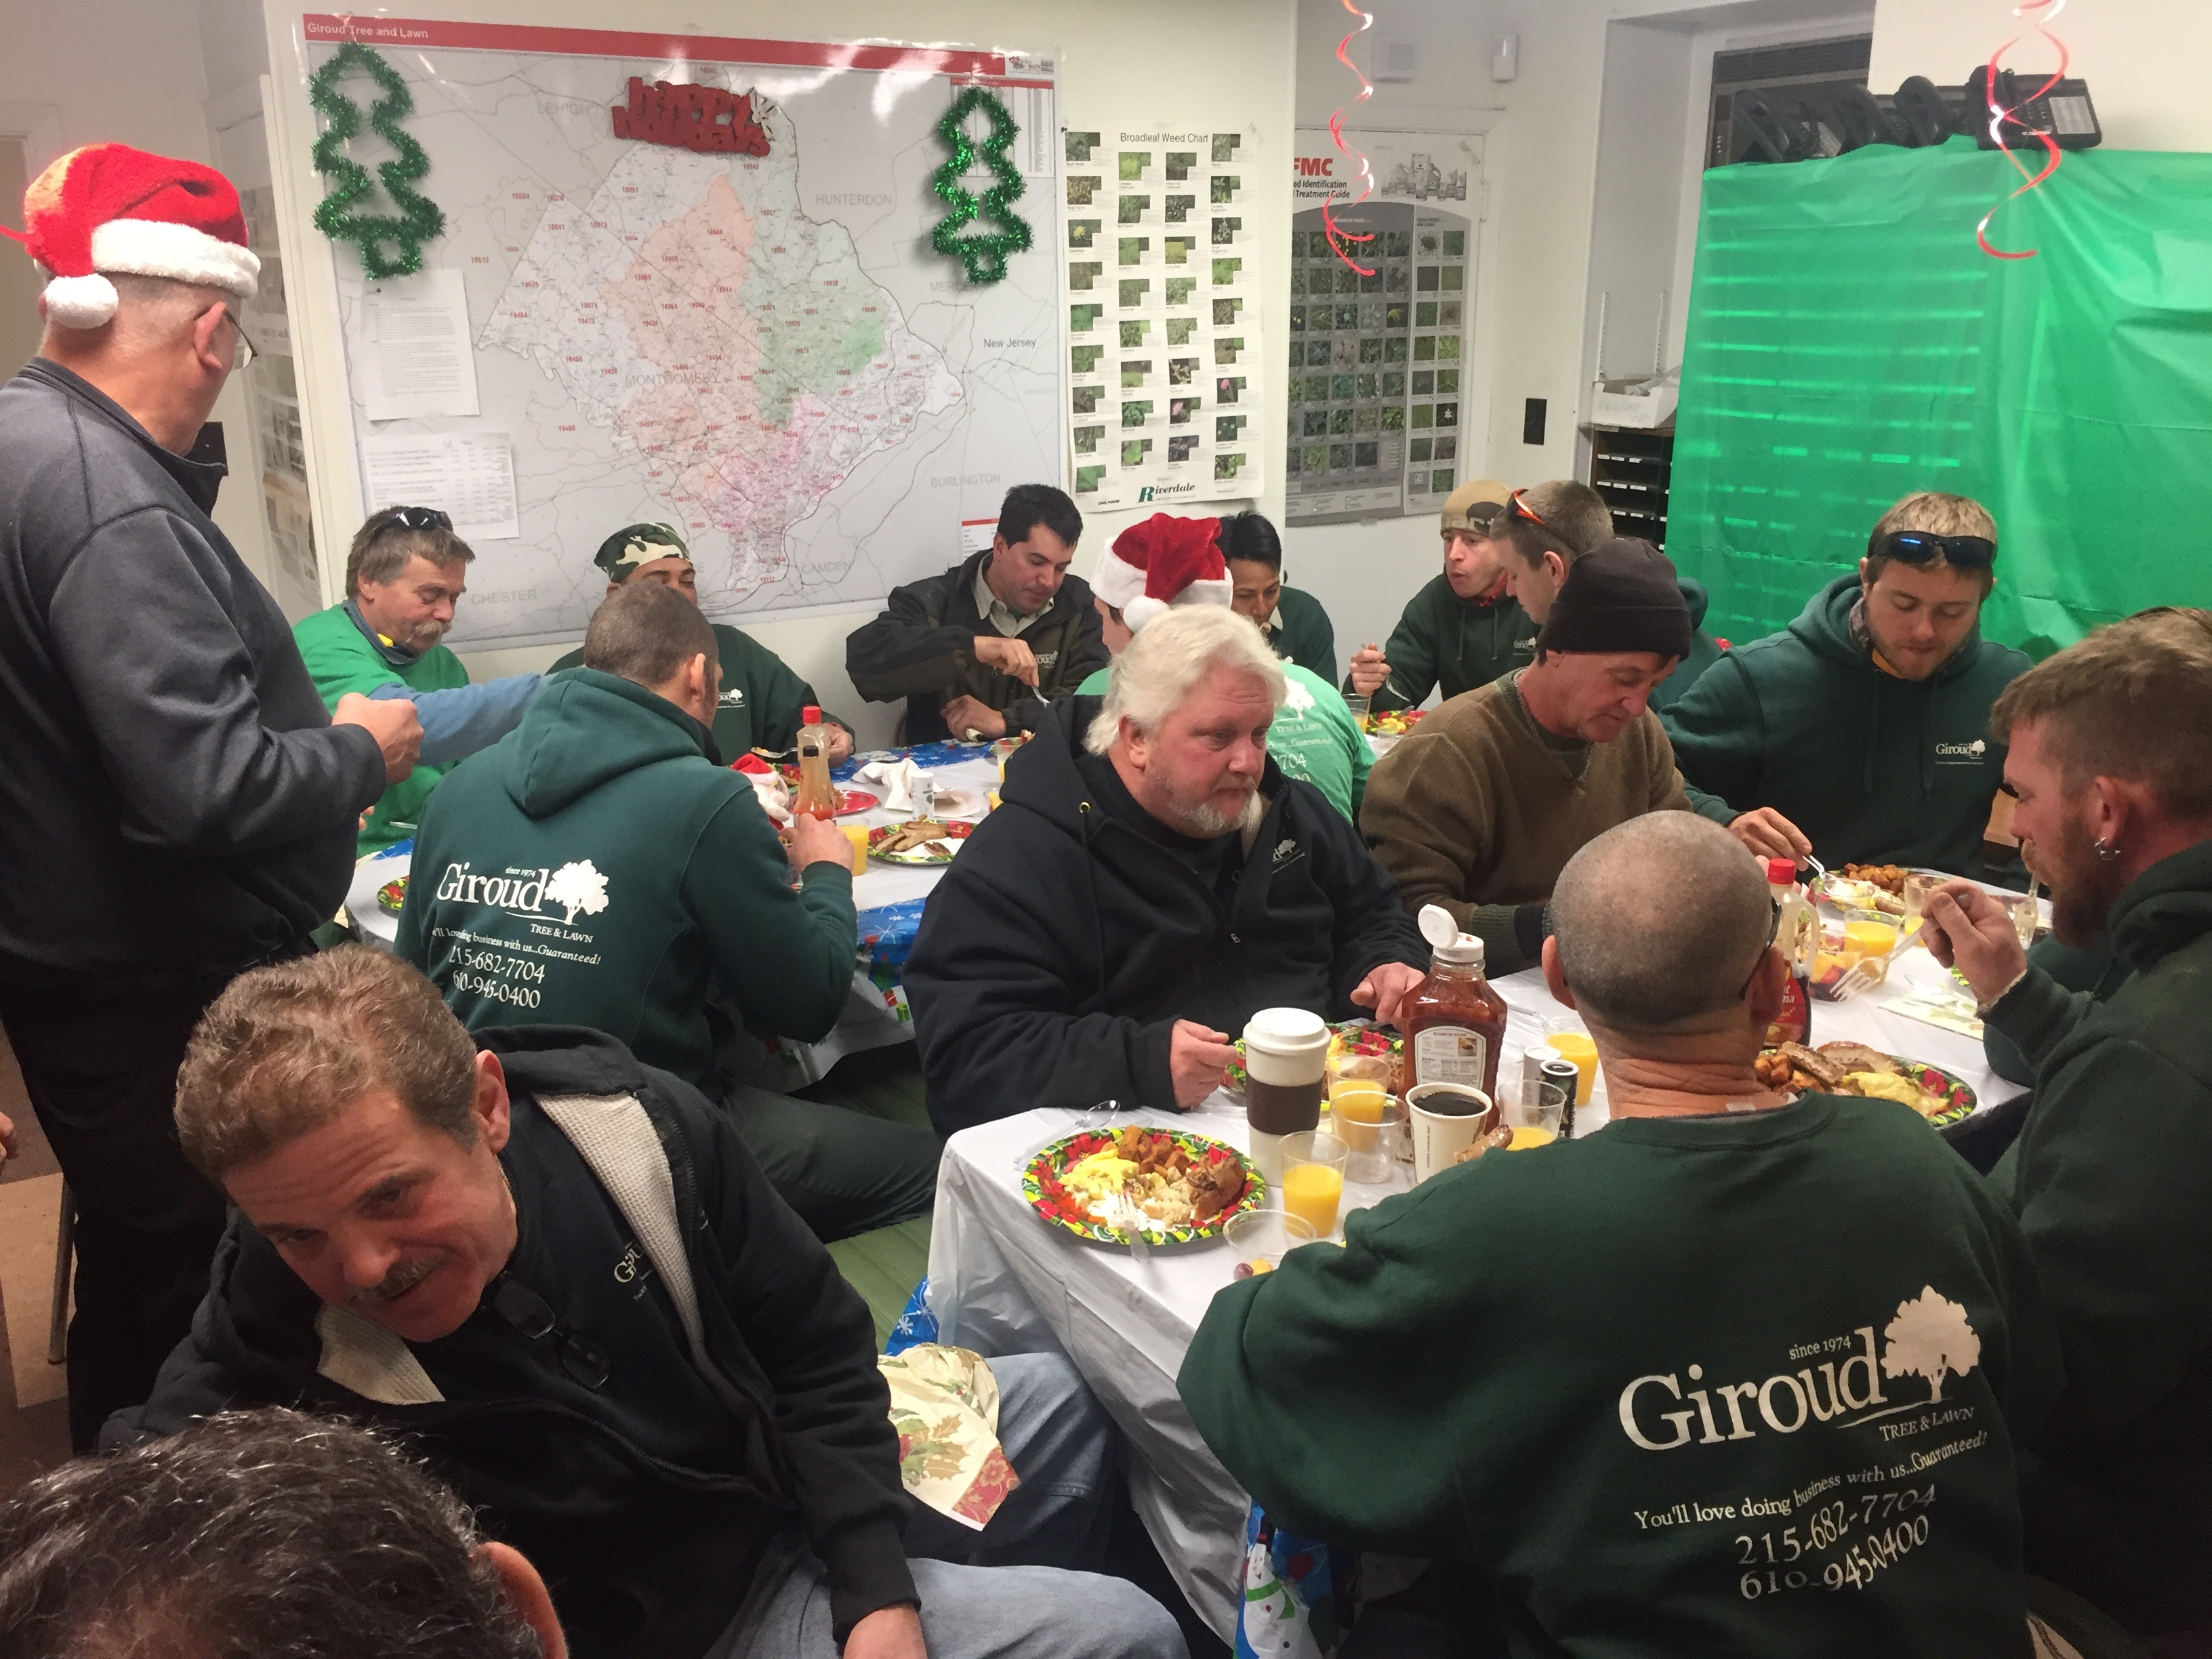 The field crew enjoys a holiday breakfast together as the office staff serves them.